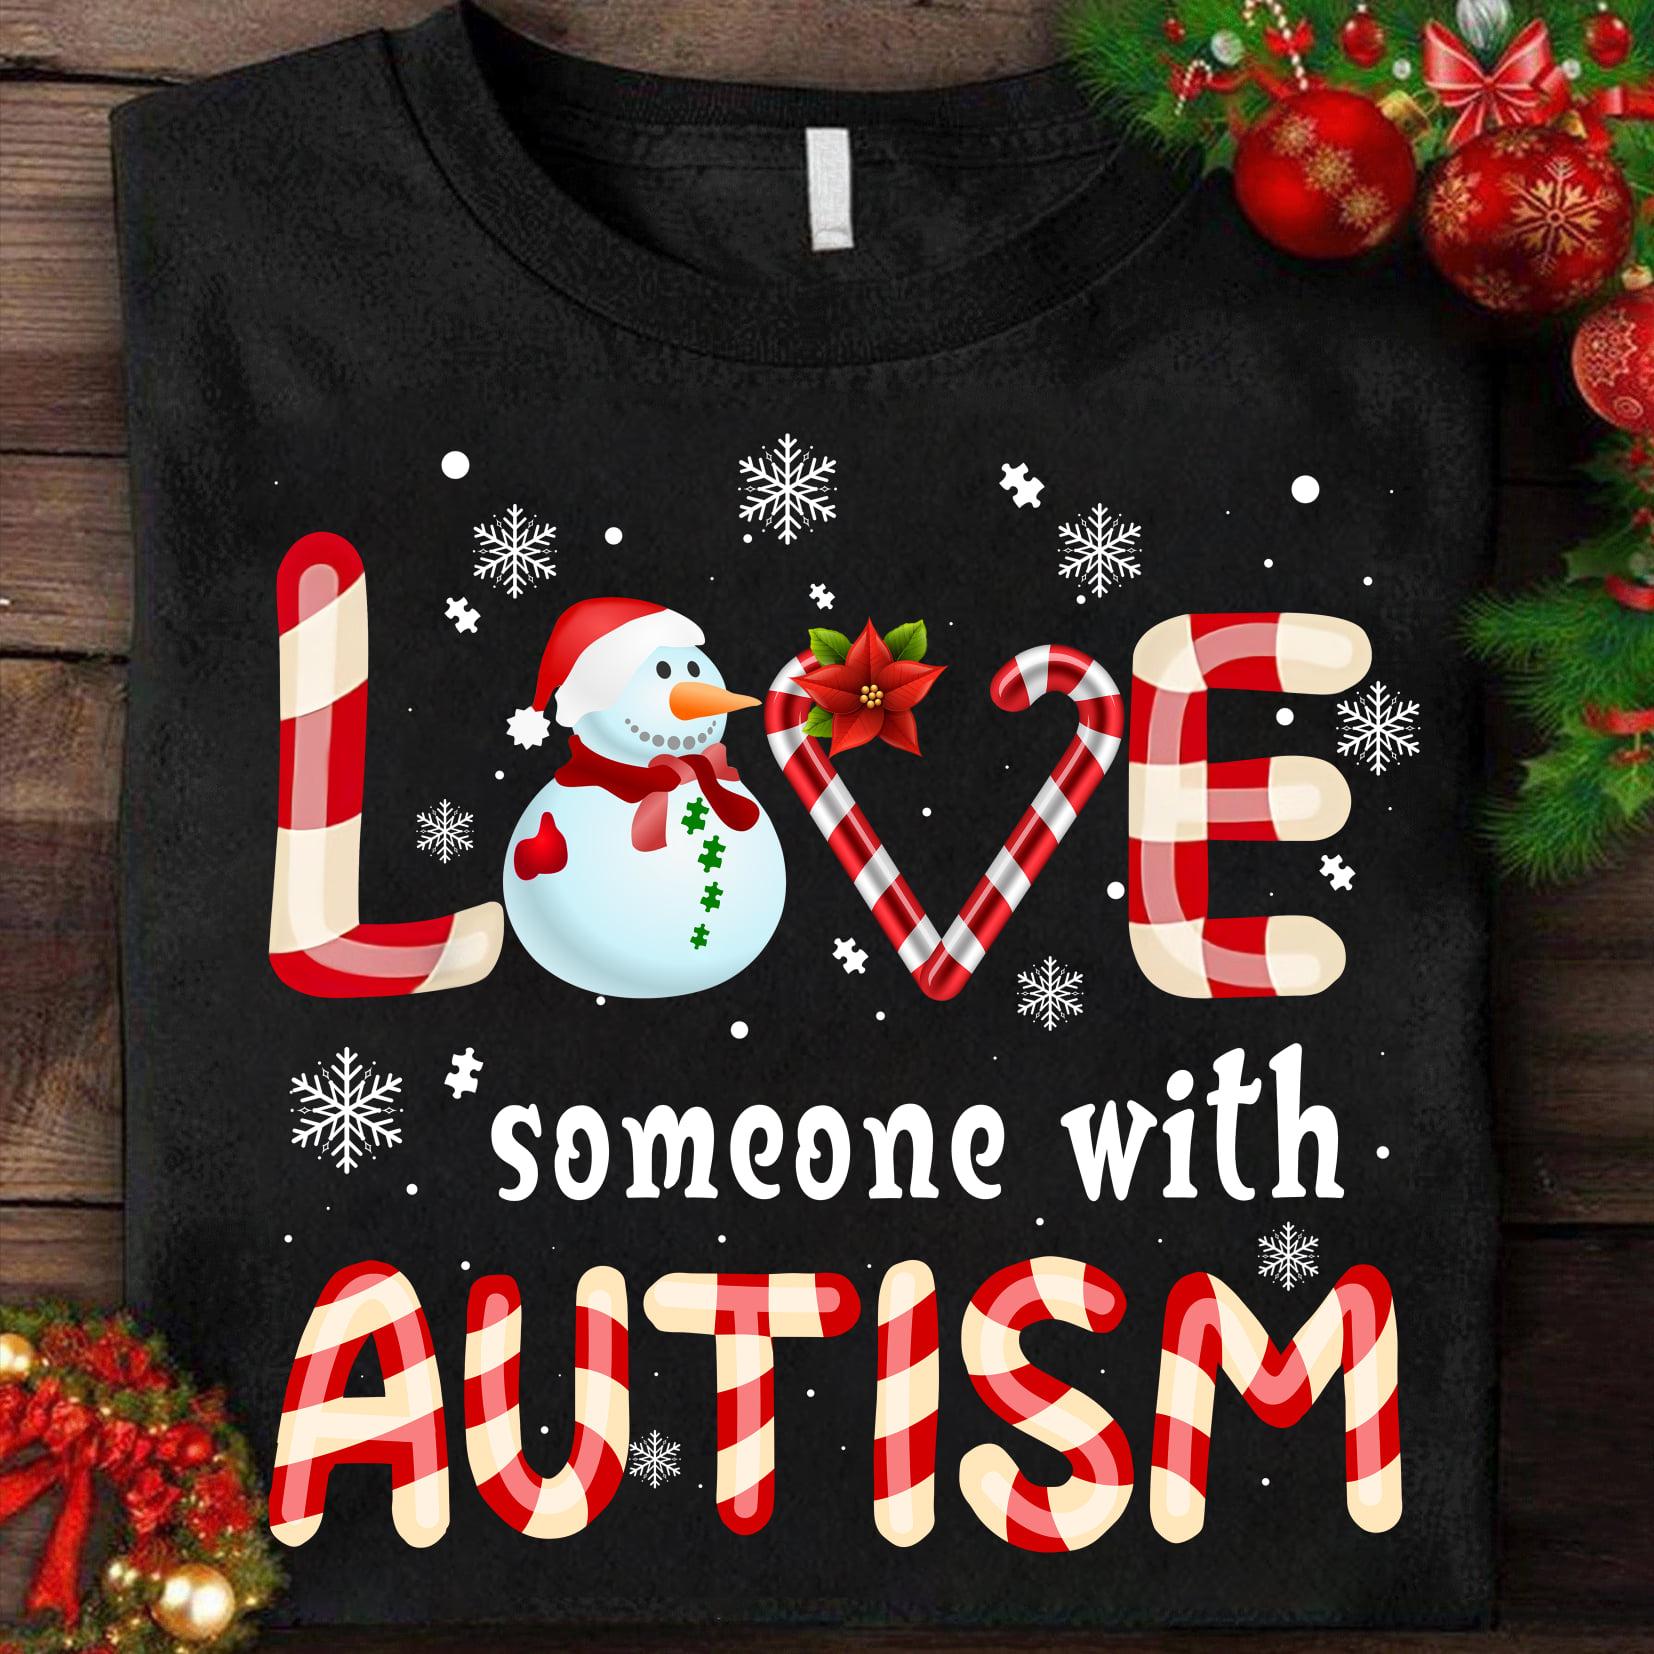 Love someone with autism - Autism awareness, Christmas snowman graphic, Christmas day ugly sweater